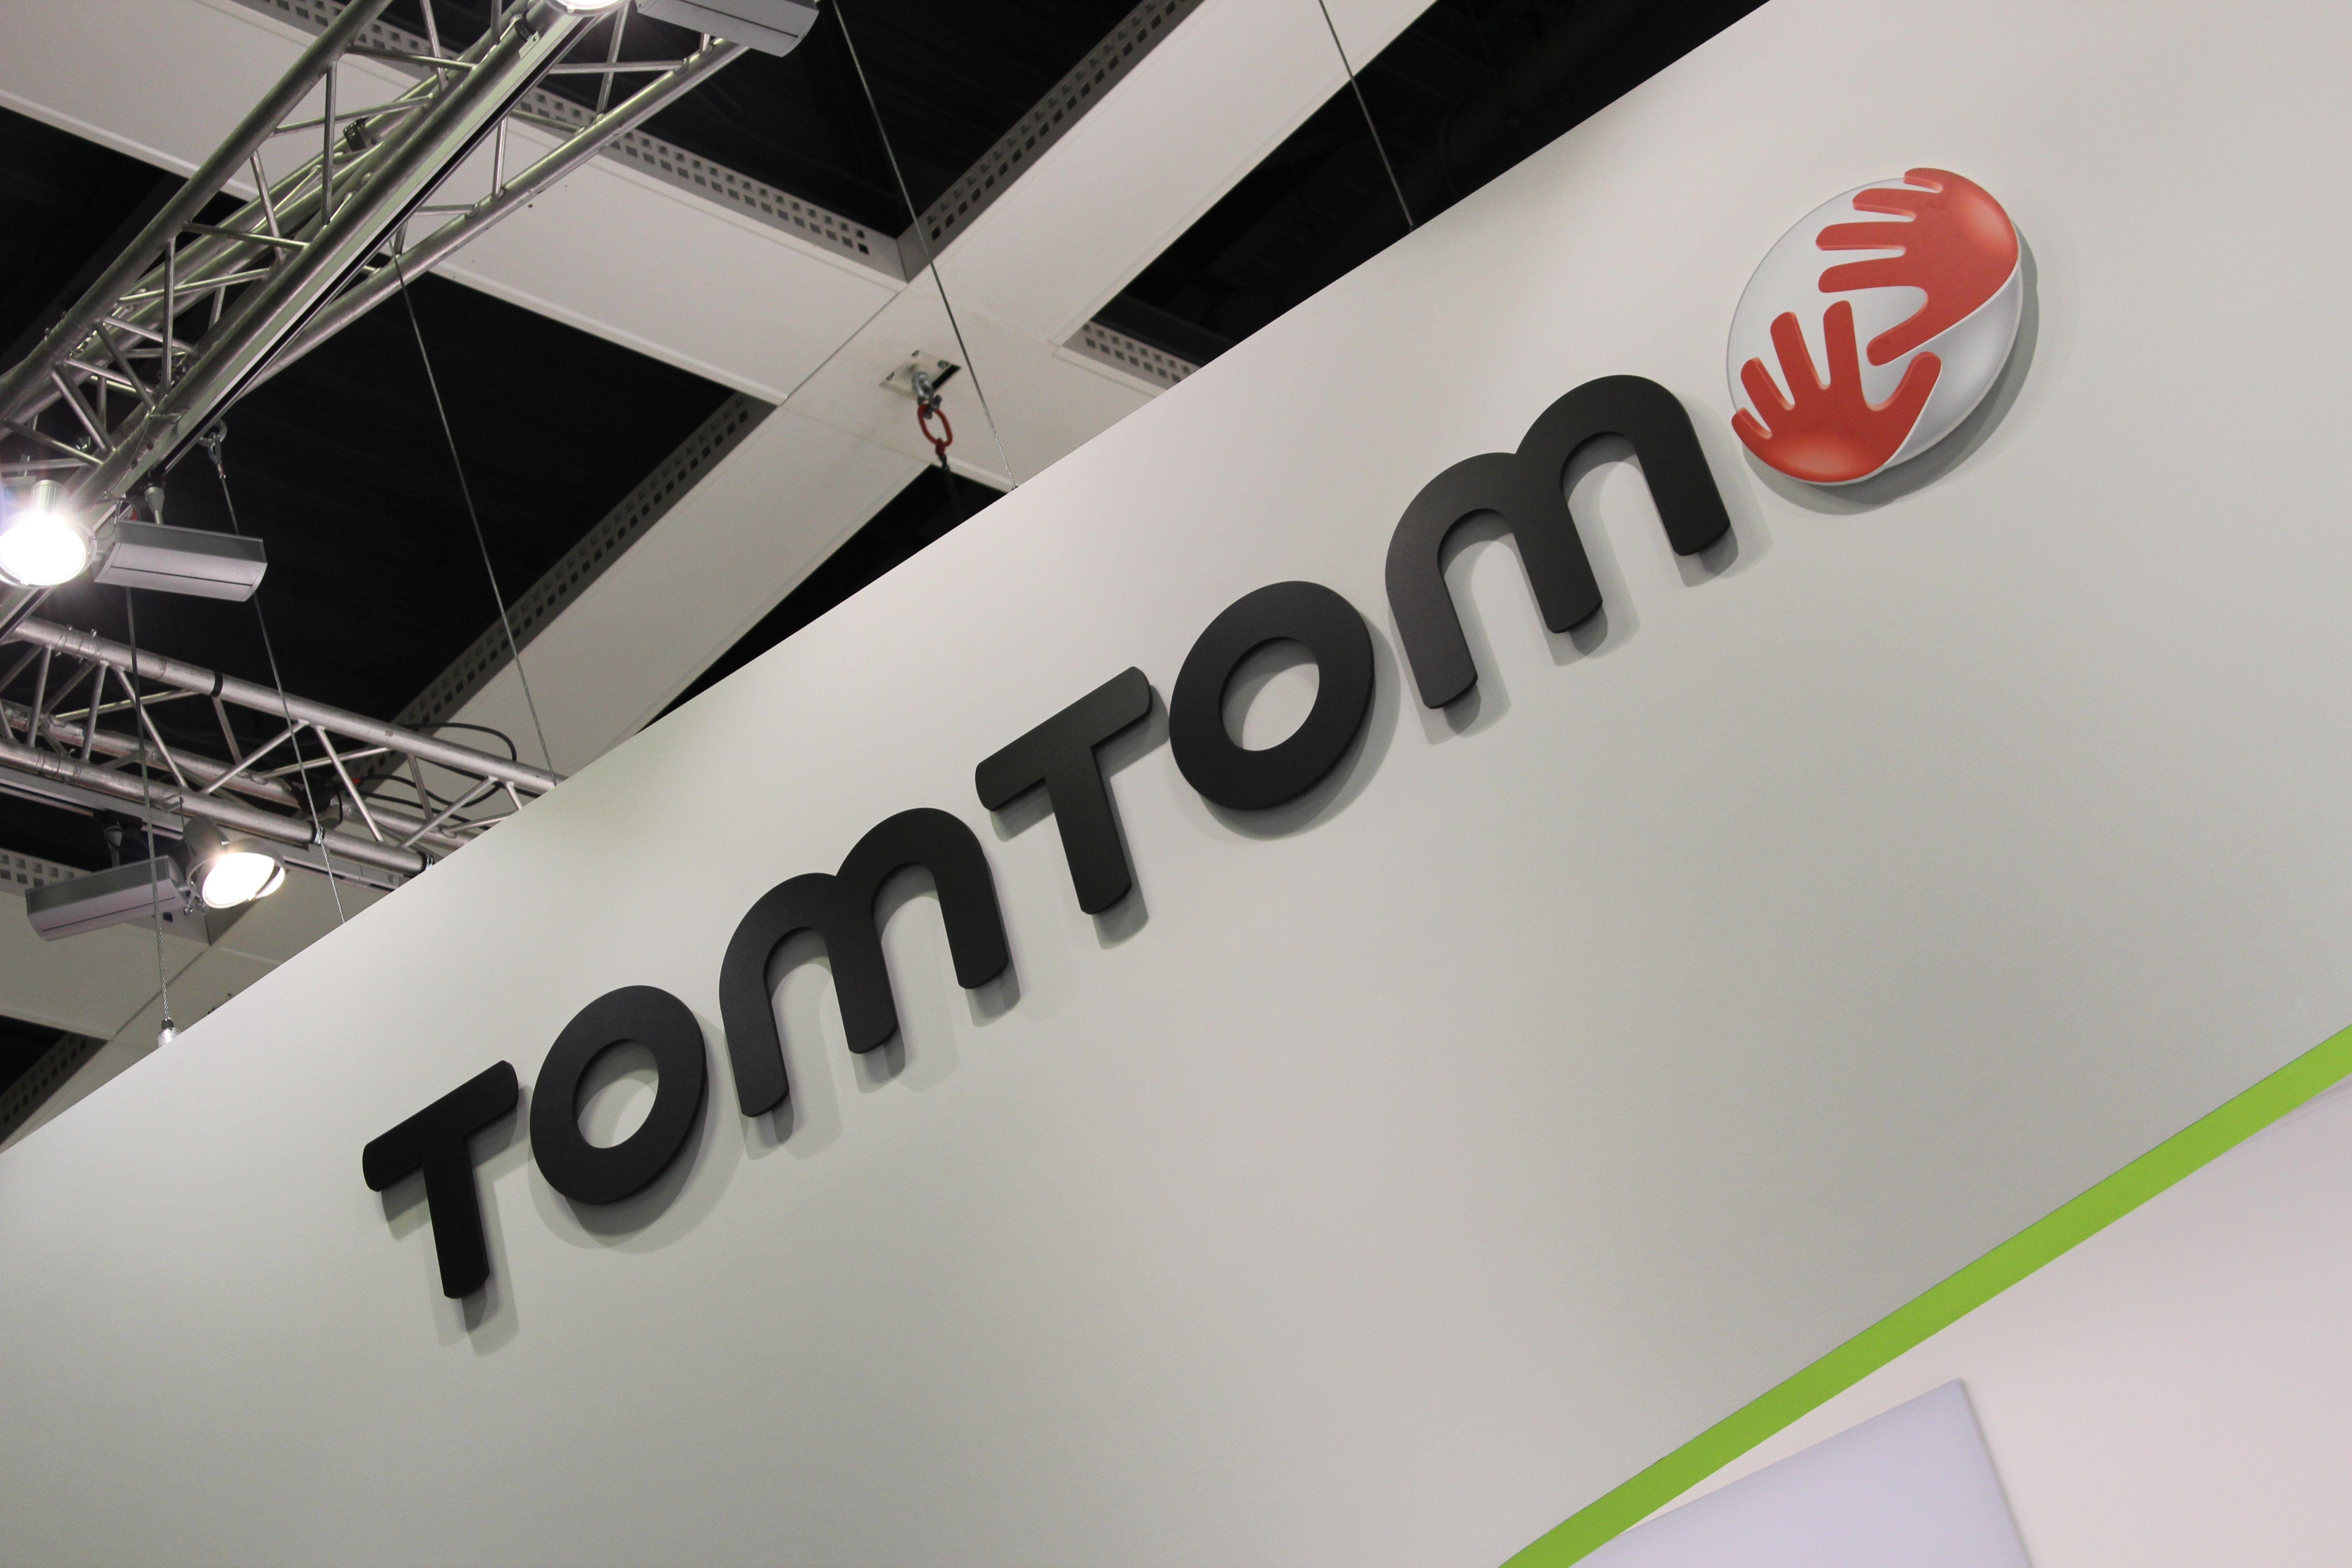 TomTom Logo - Wearable Experience Is Largely Off Wrist, TomTom VP Says. Android